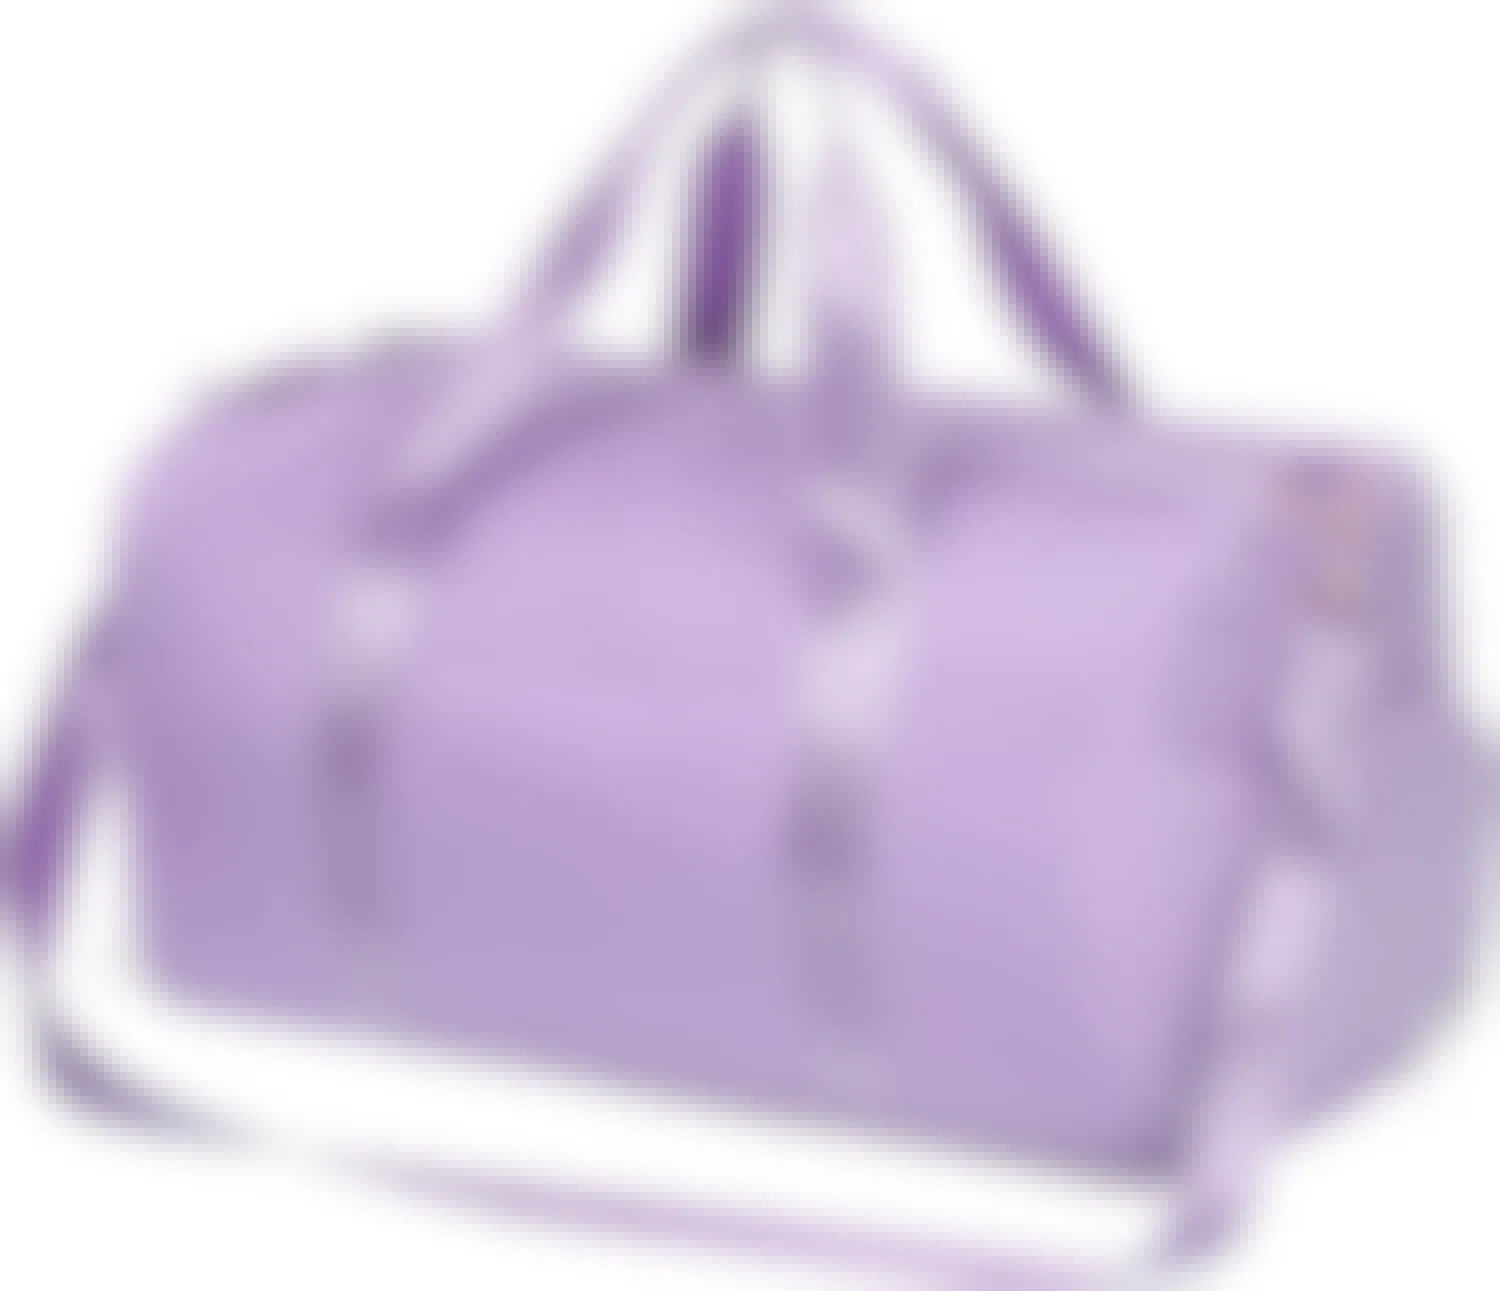 A lavender-colored dufflebag on a white background.